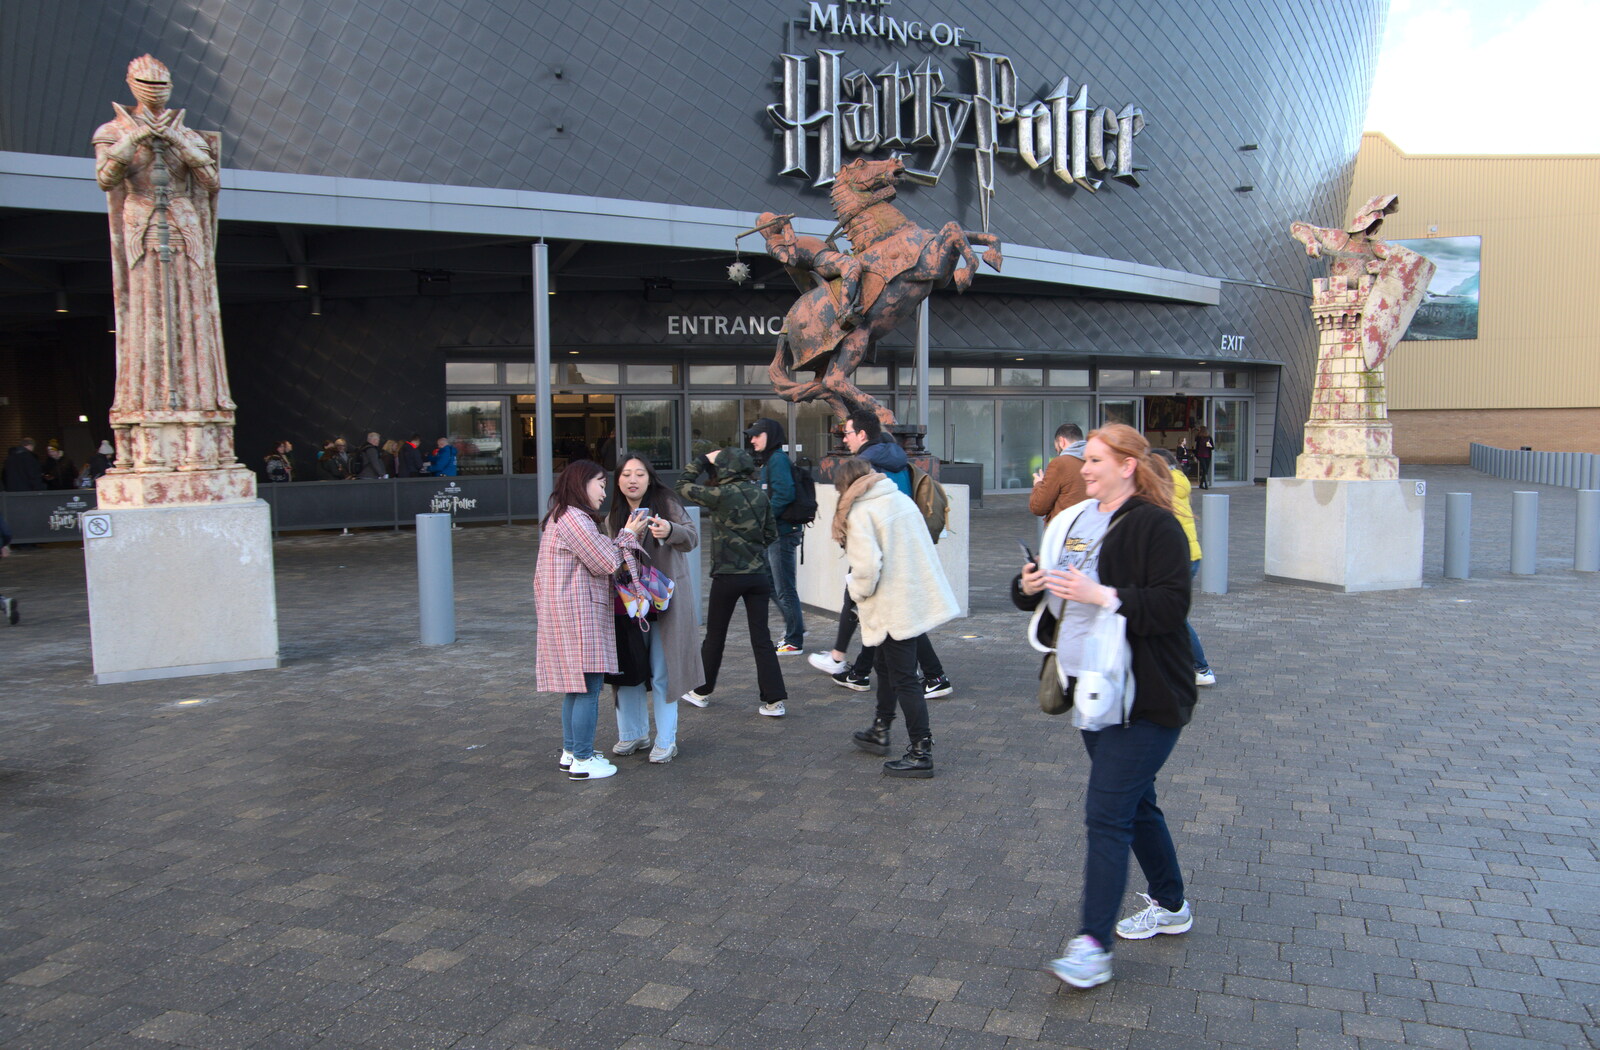 Tourists do selfies outside the studio from A Trip to Harry Potter World, Leavesden, Hertfordshire - 16th February 2020